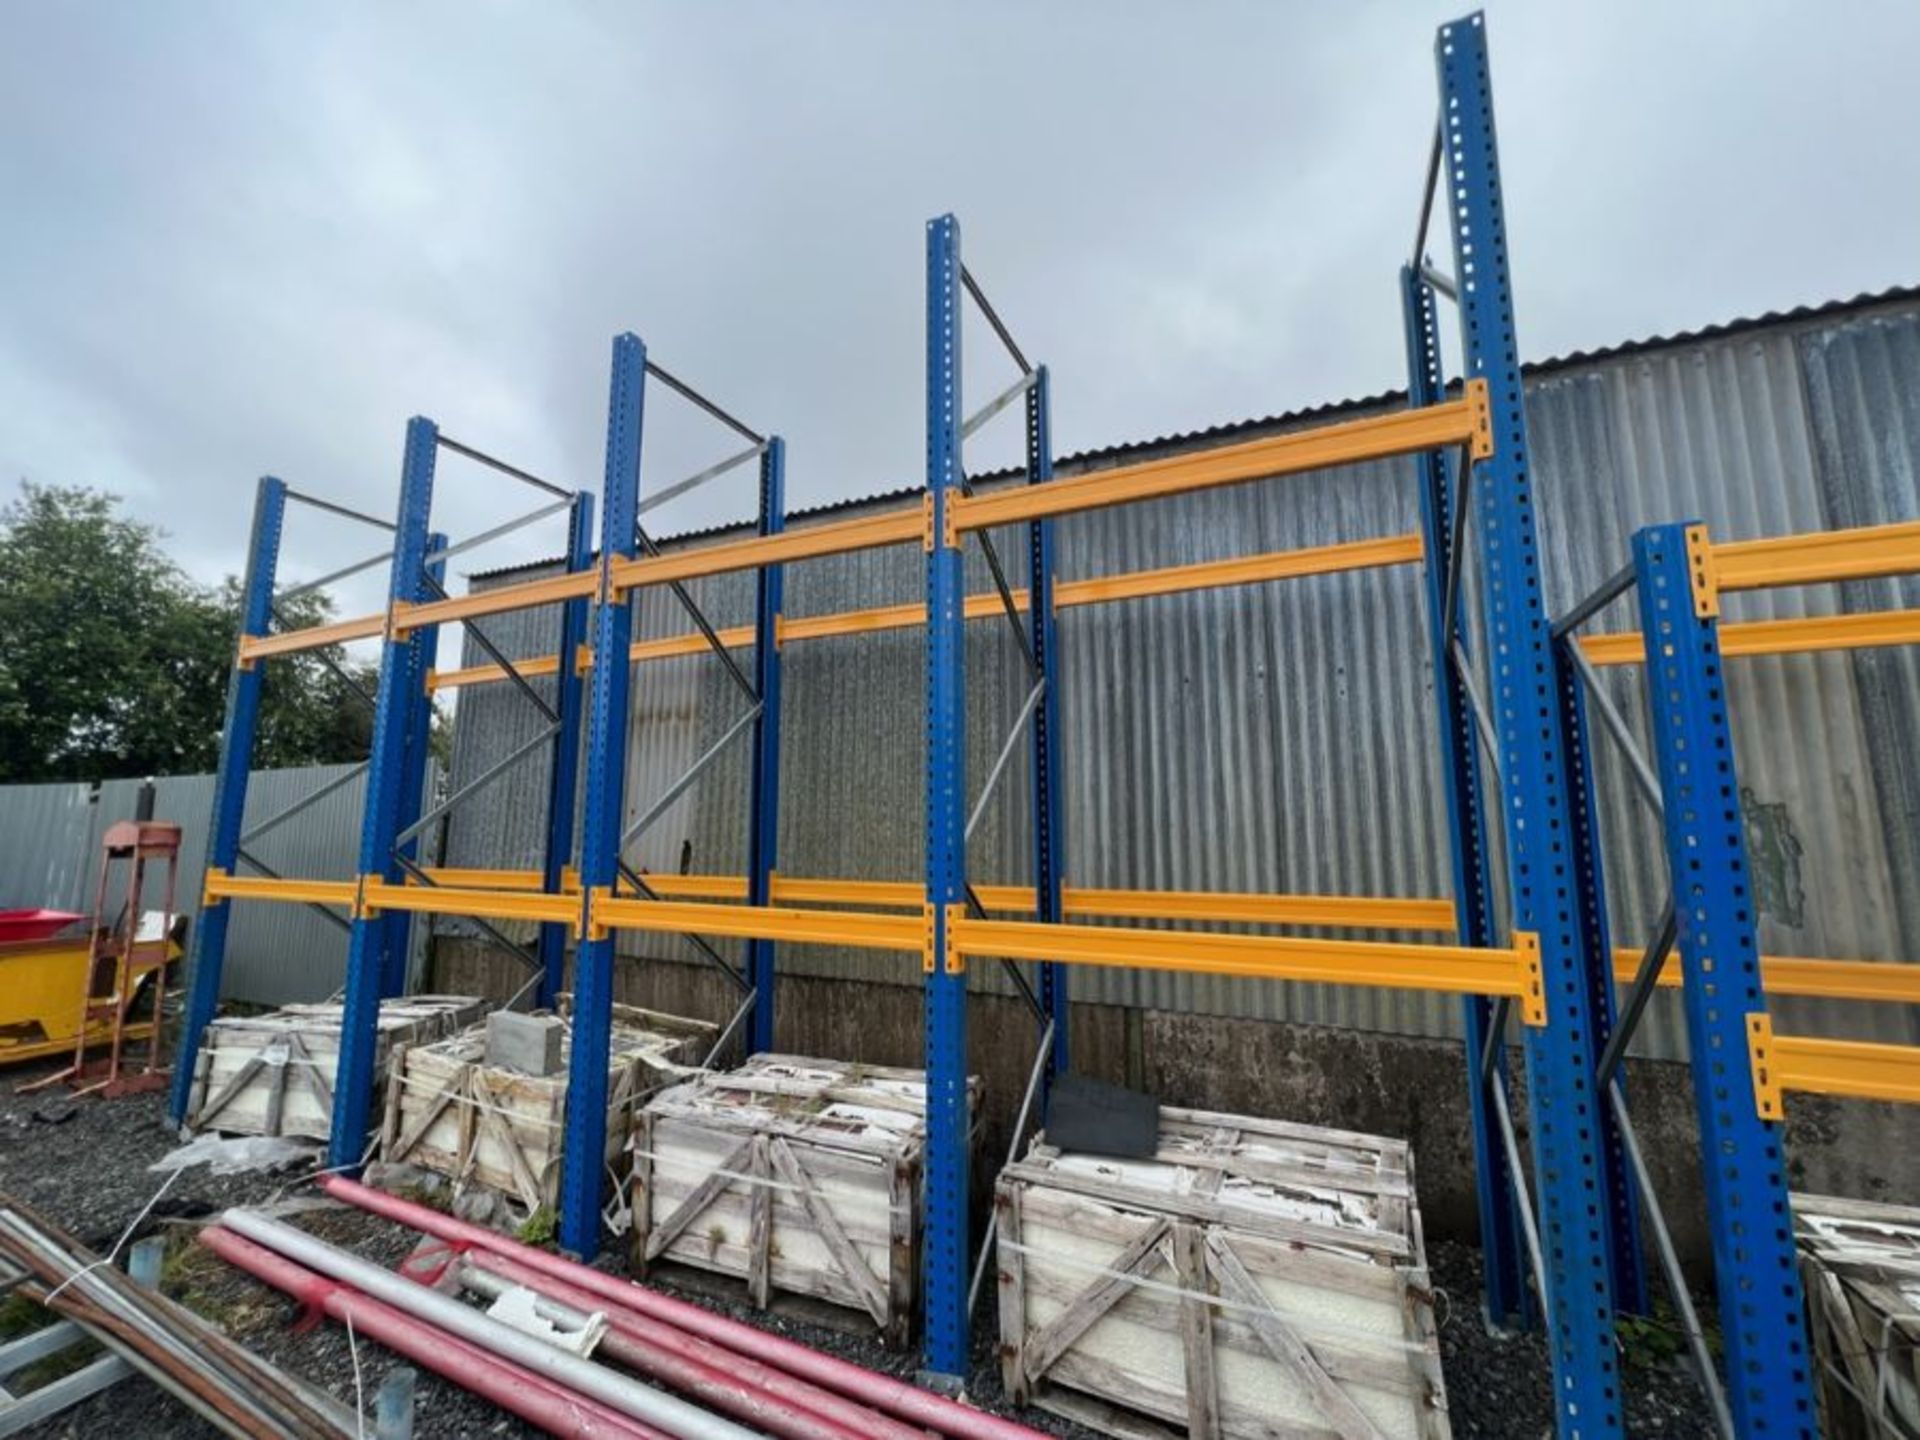 4X BAYS OF PALLET RACKING/HEAVY DUTY SHELVING (5X UPRIGHTS & 16 YELLOW CROSS BARS) (141” H X 57” W x - Image 2 of 4